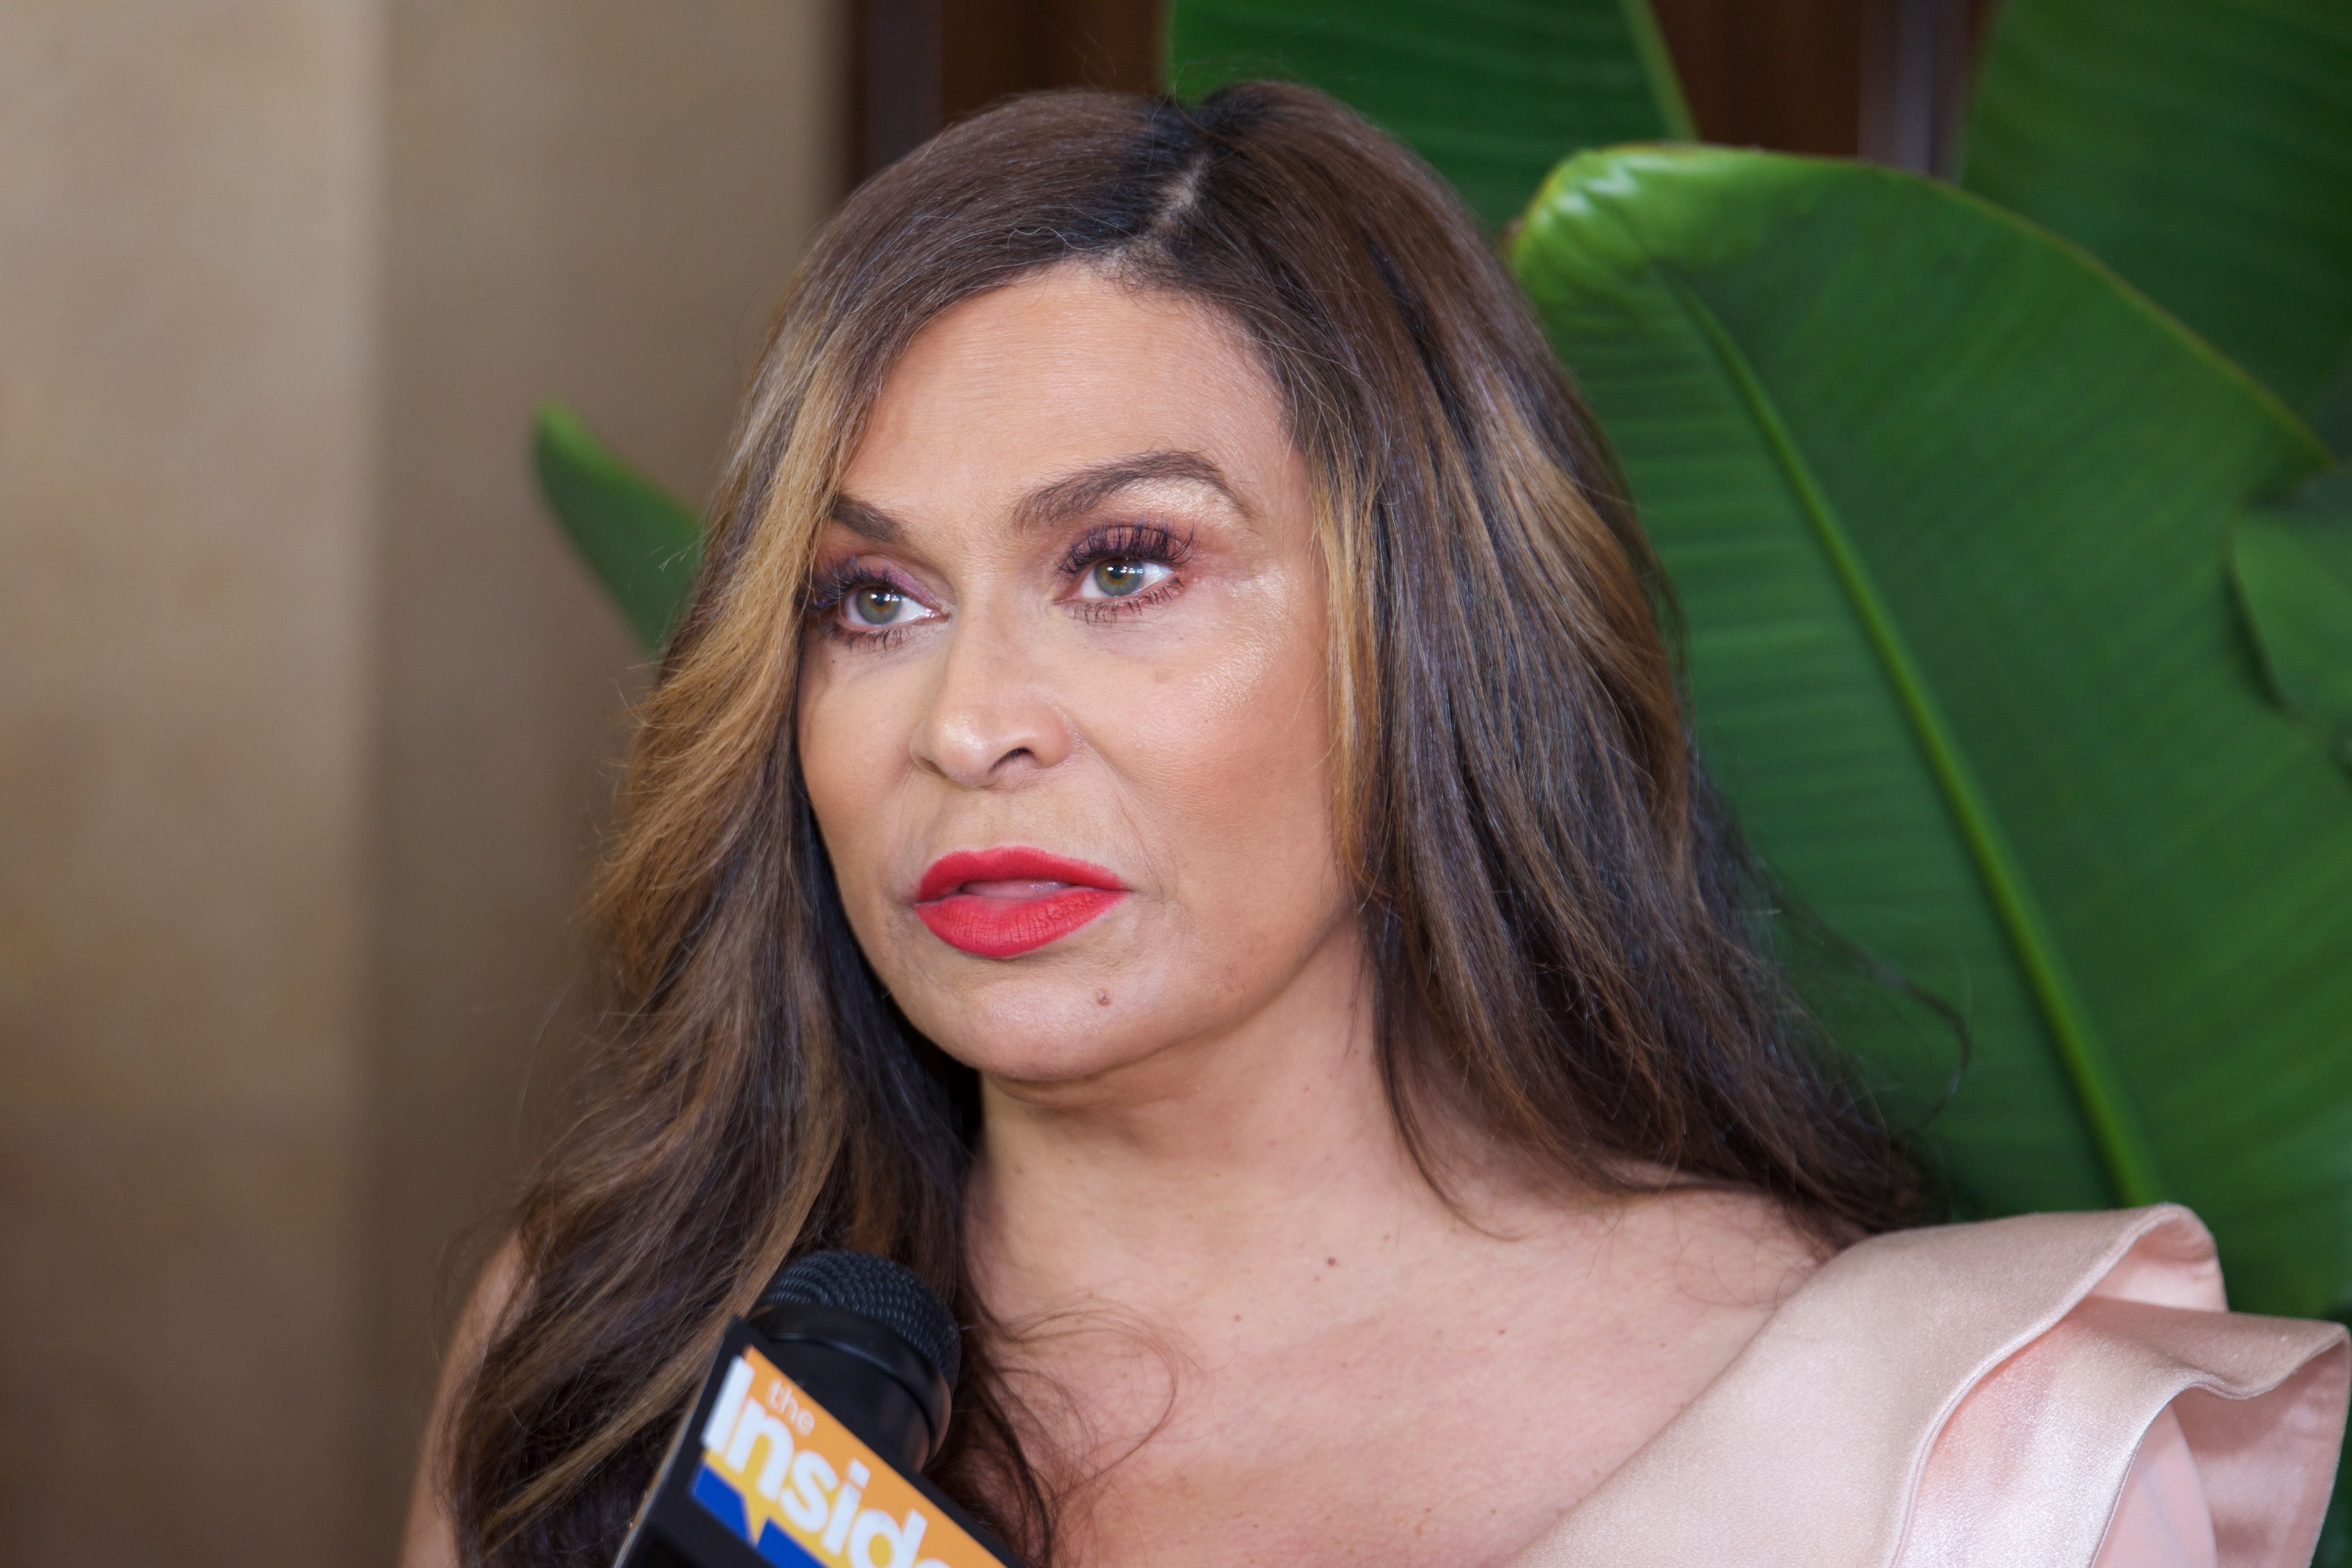 Tina Knowles during the Ladylike Foundation's 9th Annual Women of Excellence at The Beverly Hilton Hotel on June 3, 2017, in Beverly Hills, California. | Source: Getty Images